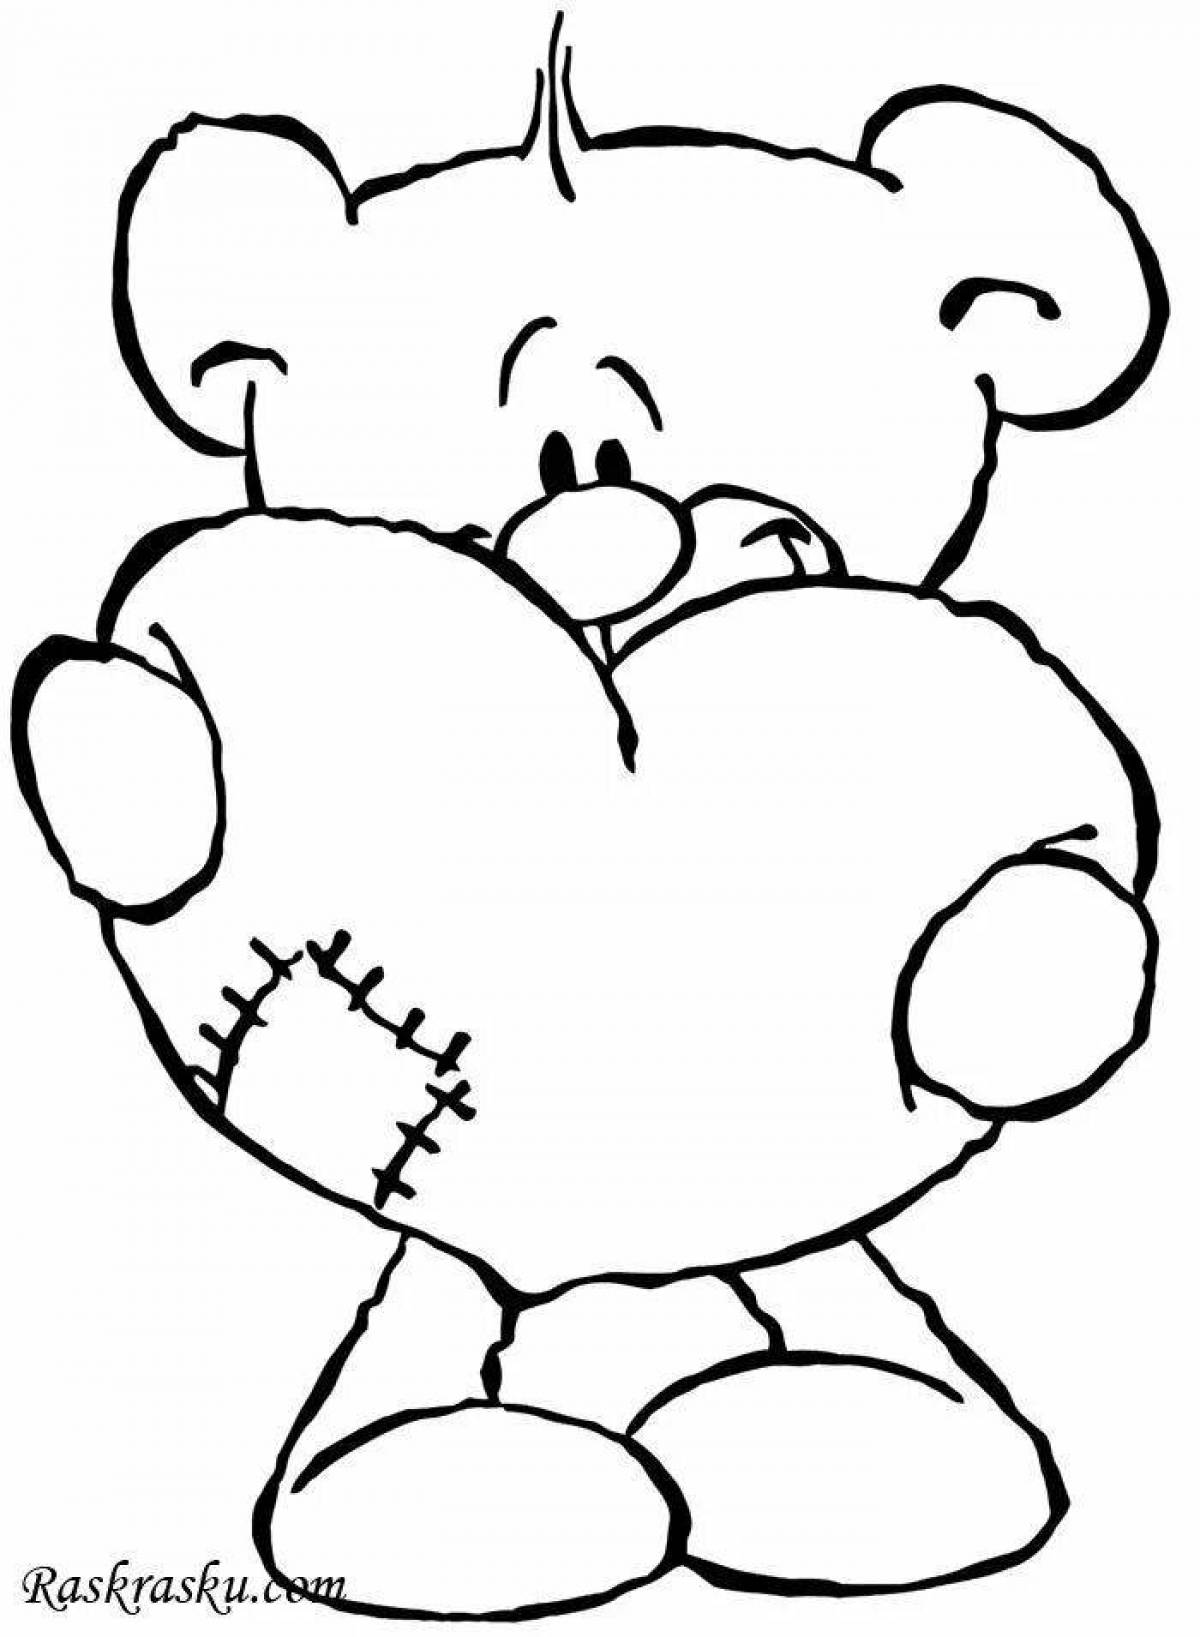 Cute and cuddly teddy bear coloring book